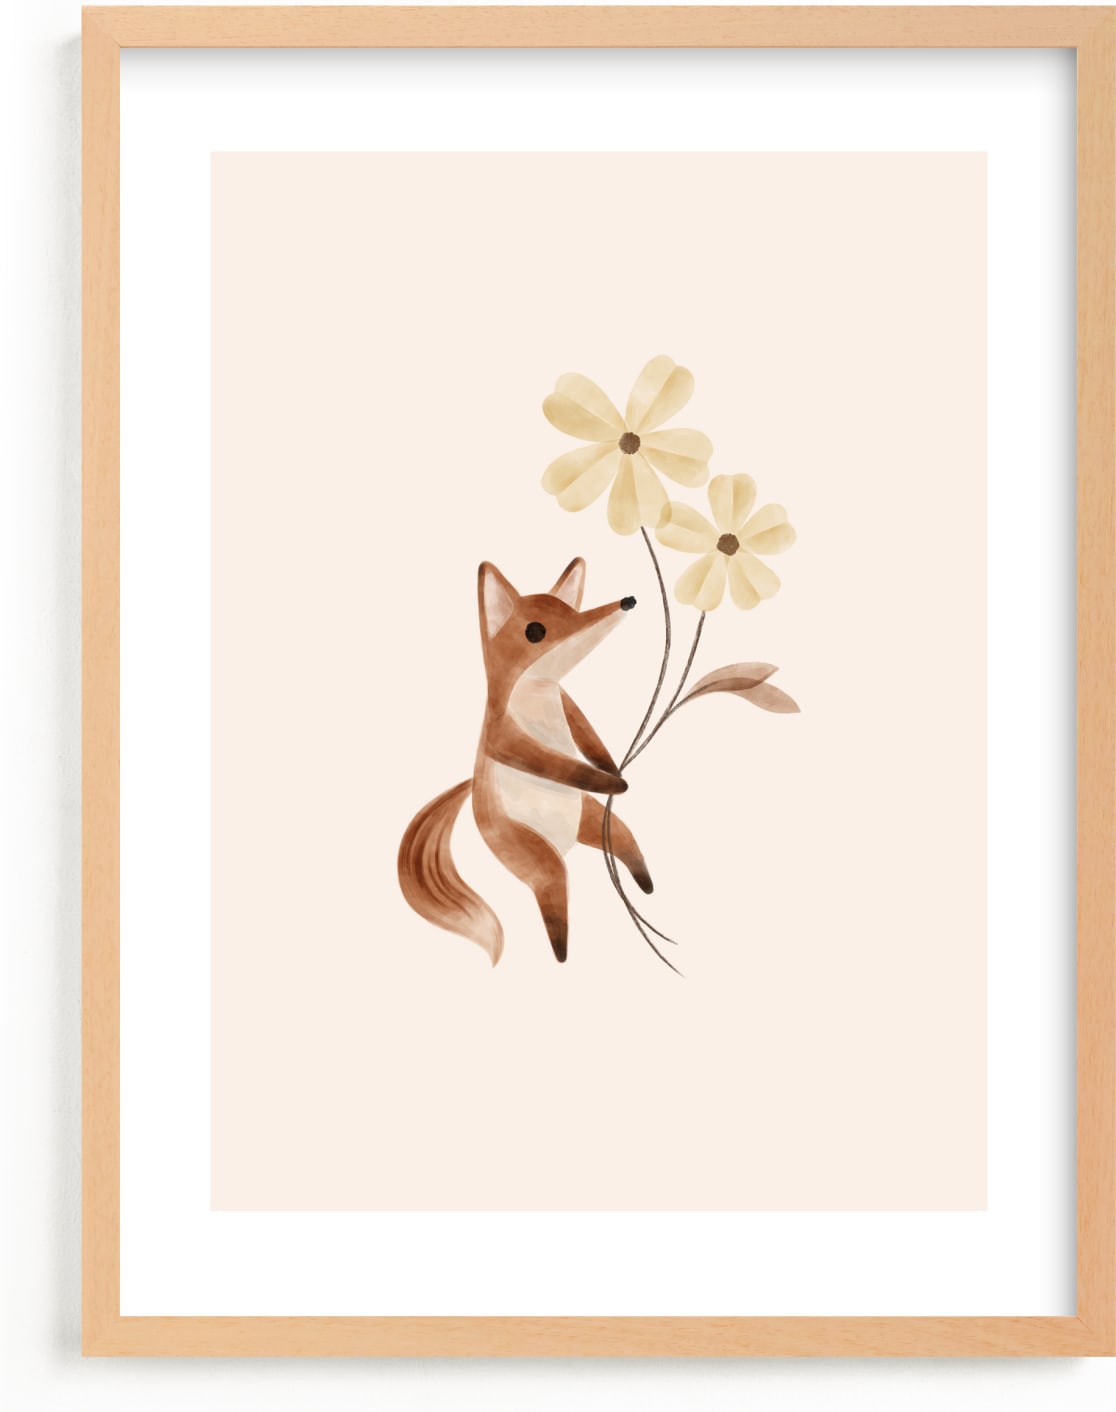 This is a brown, beige art by Vivian Yiwing called fox with flowers.